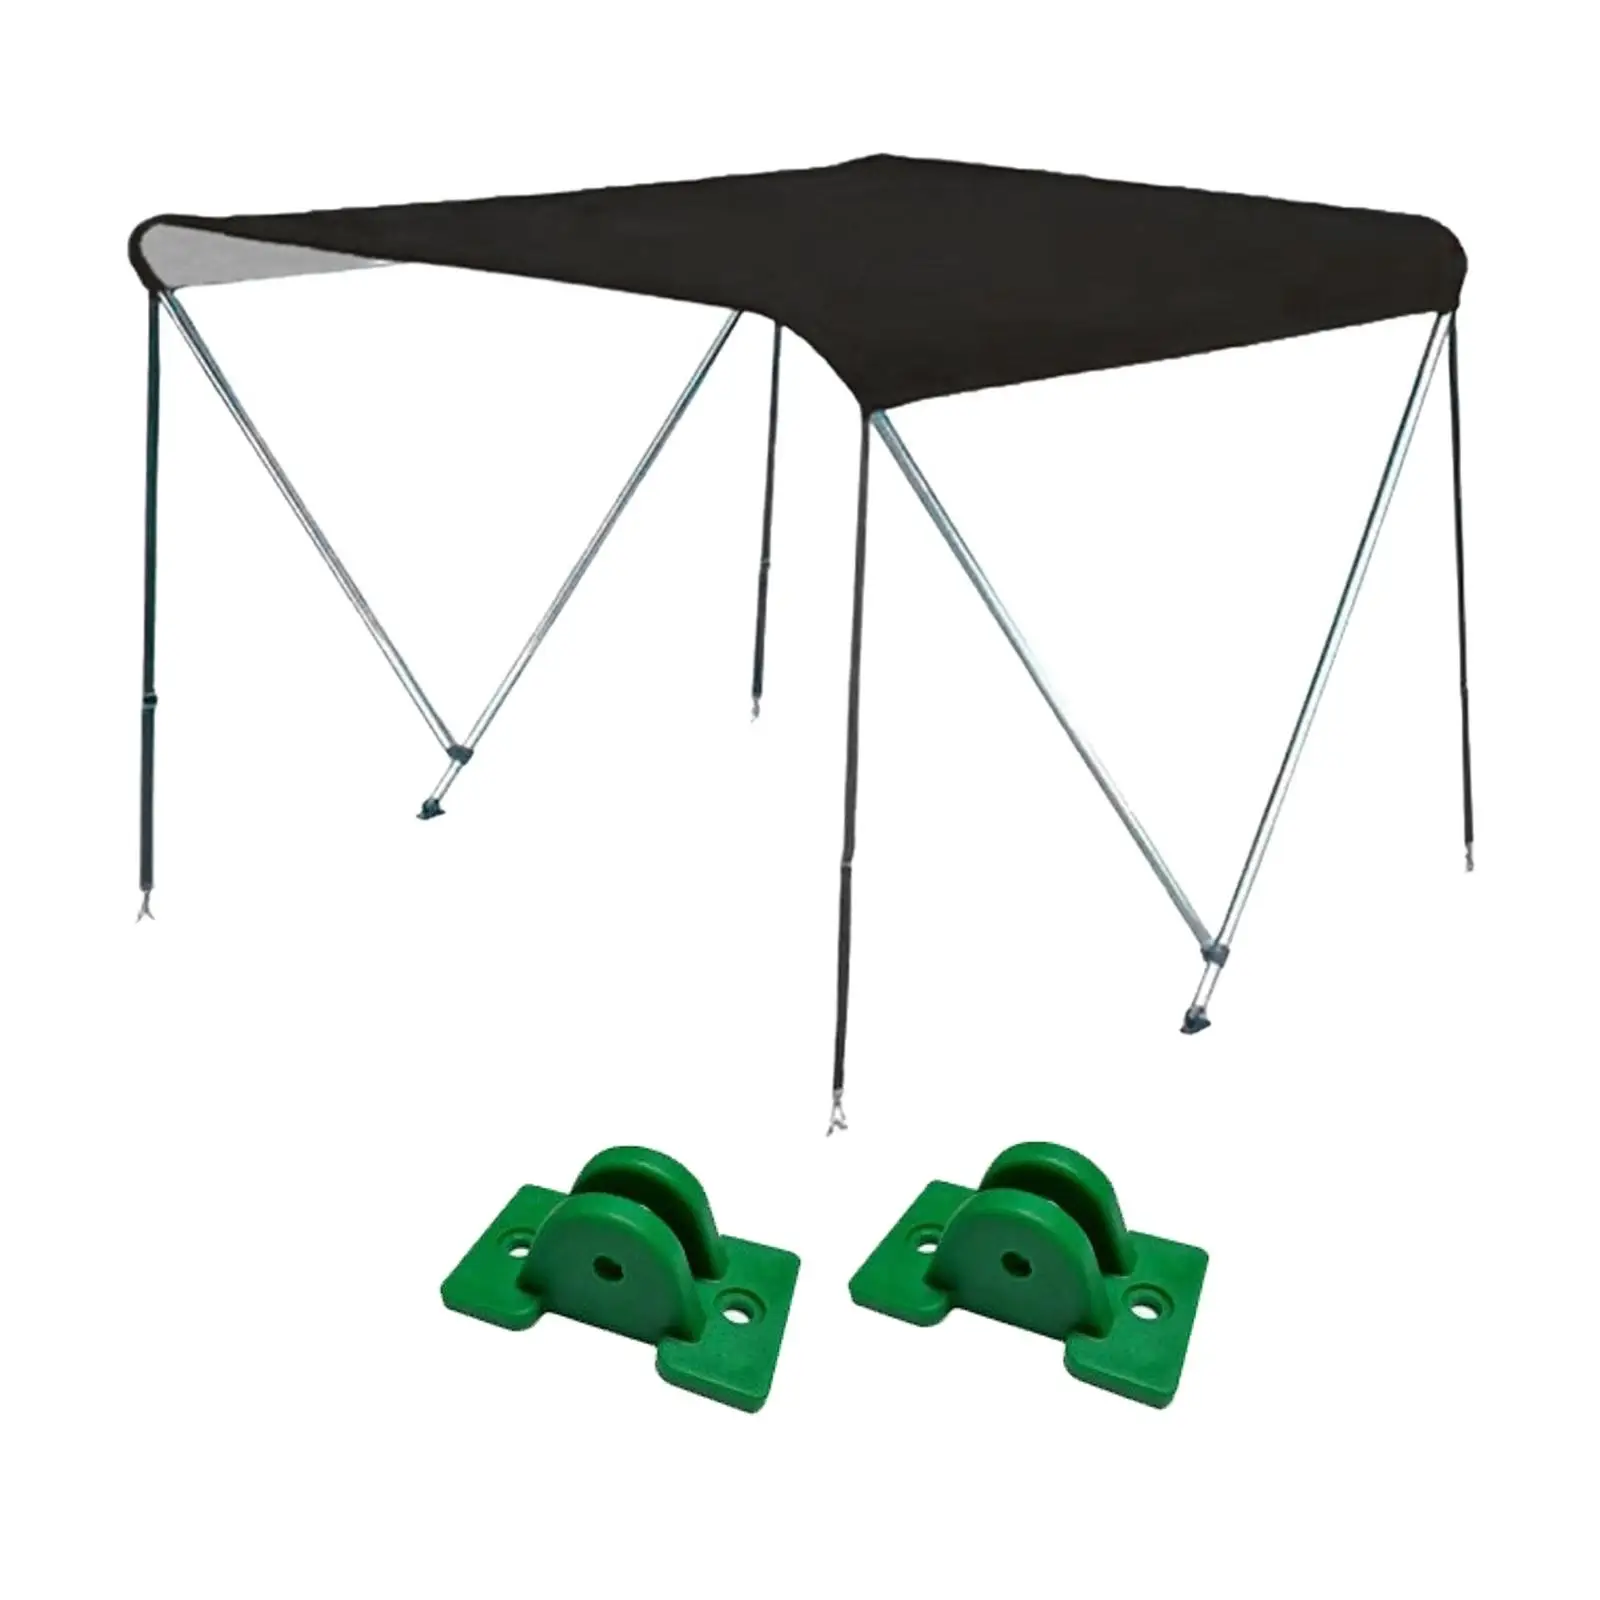 Boat Bimini Top Protection Folding Boat Canopy for Boat Sailboat Canoe with A Width of 1-1.4 Meters